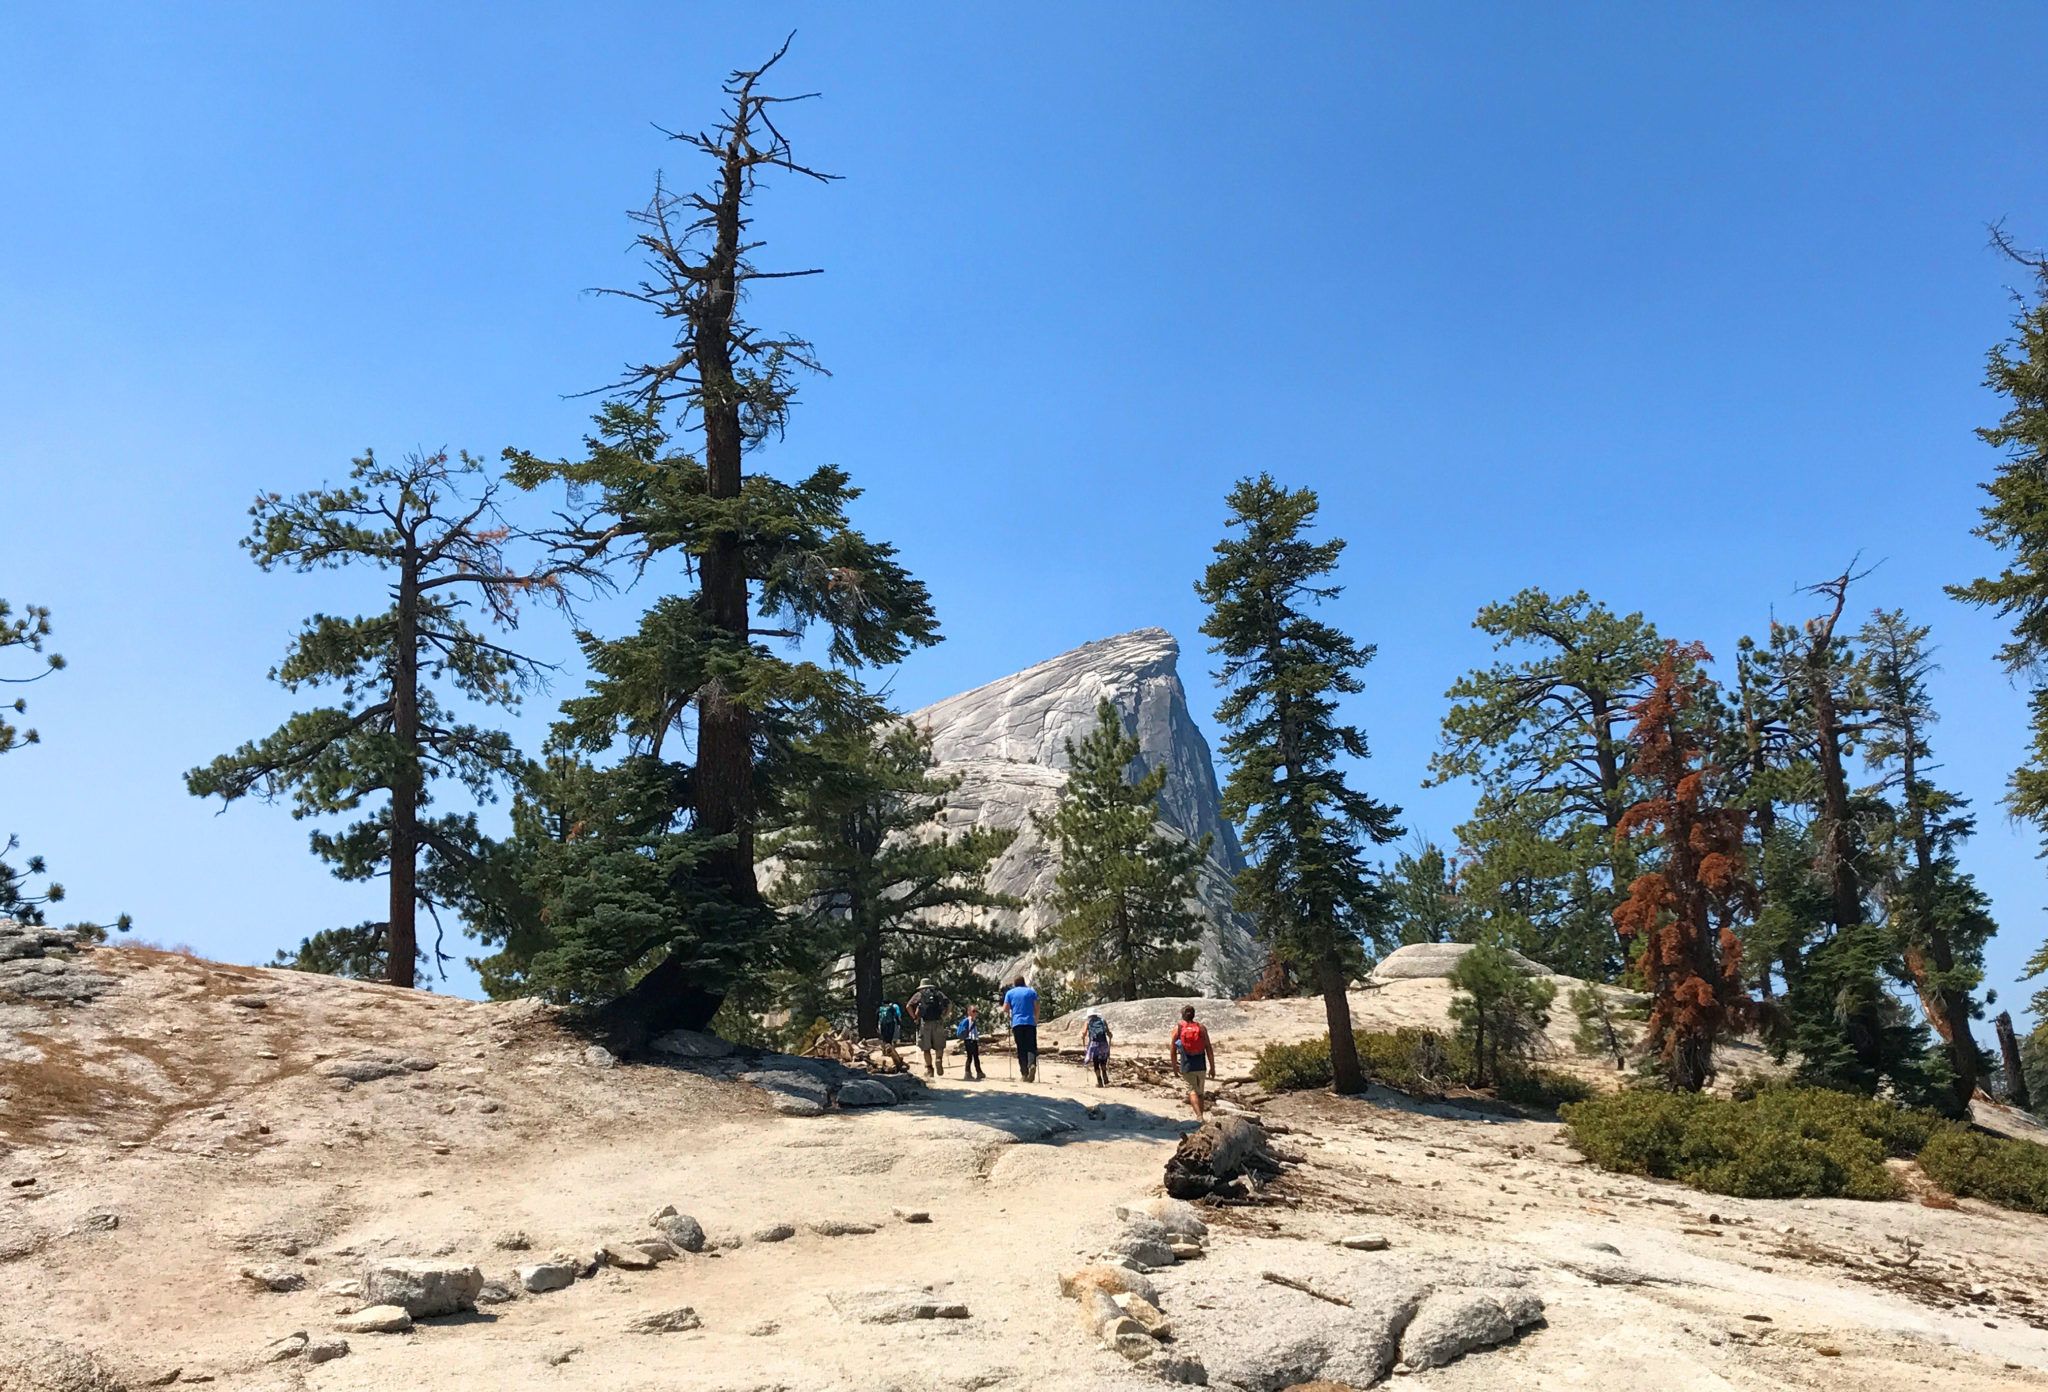 Getting closer to the top of Half Dome